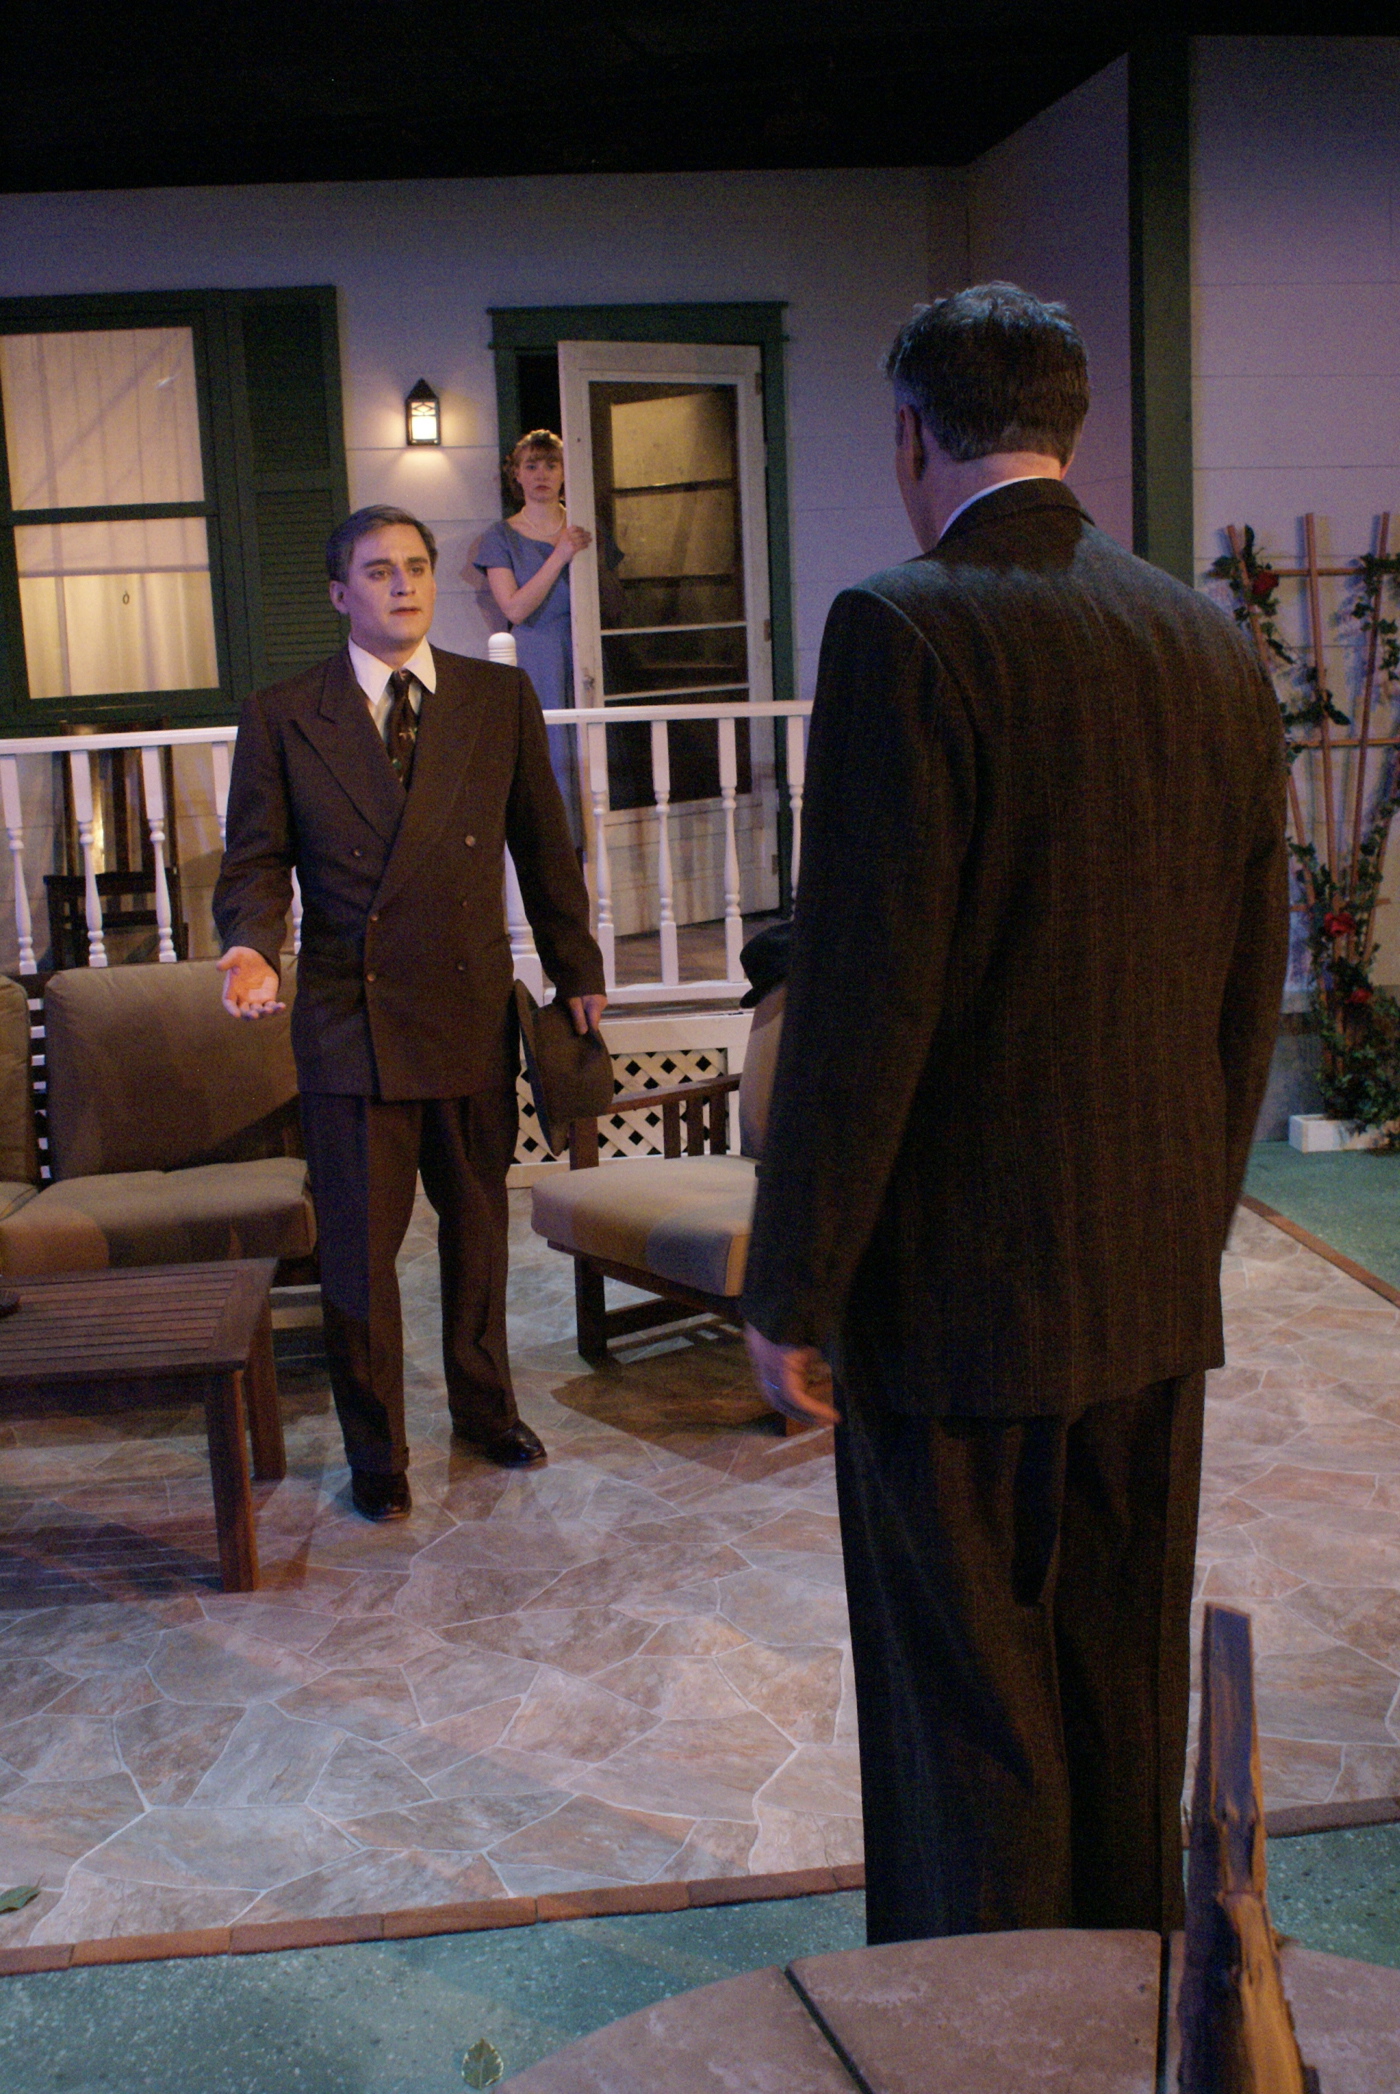 2012 All My Sons - 070